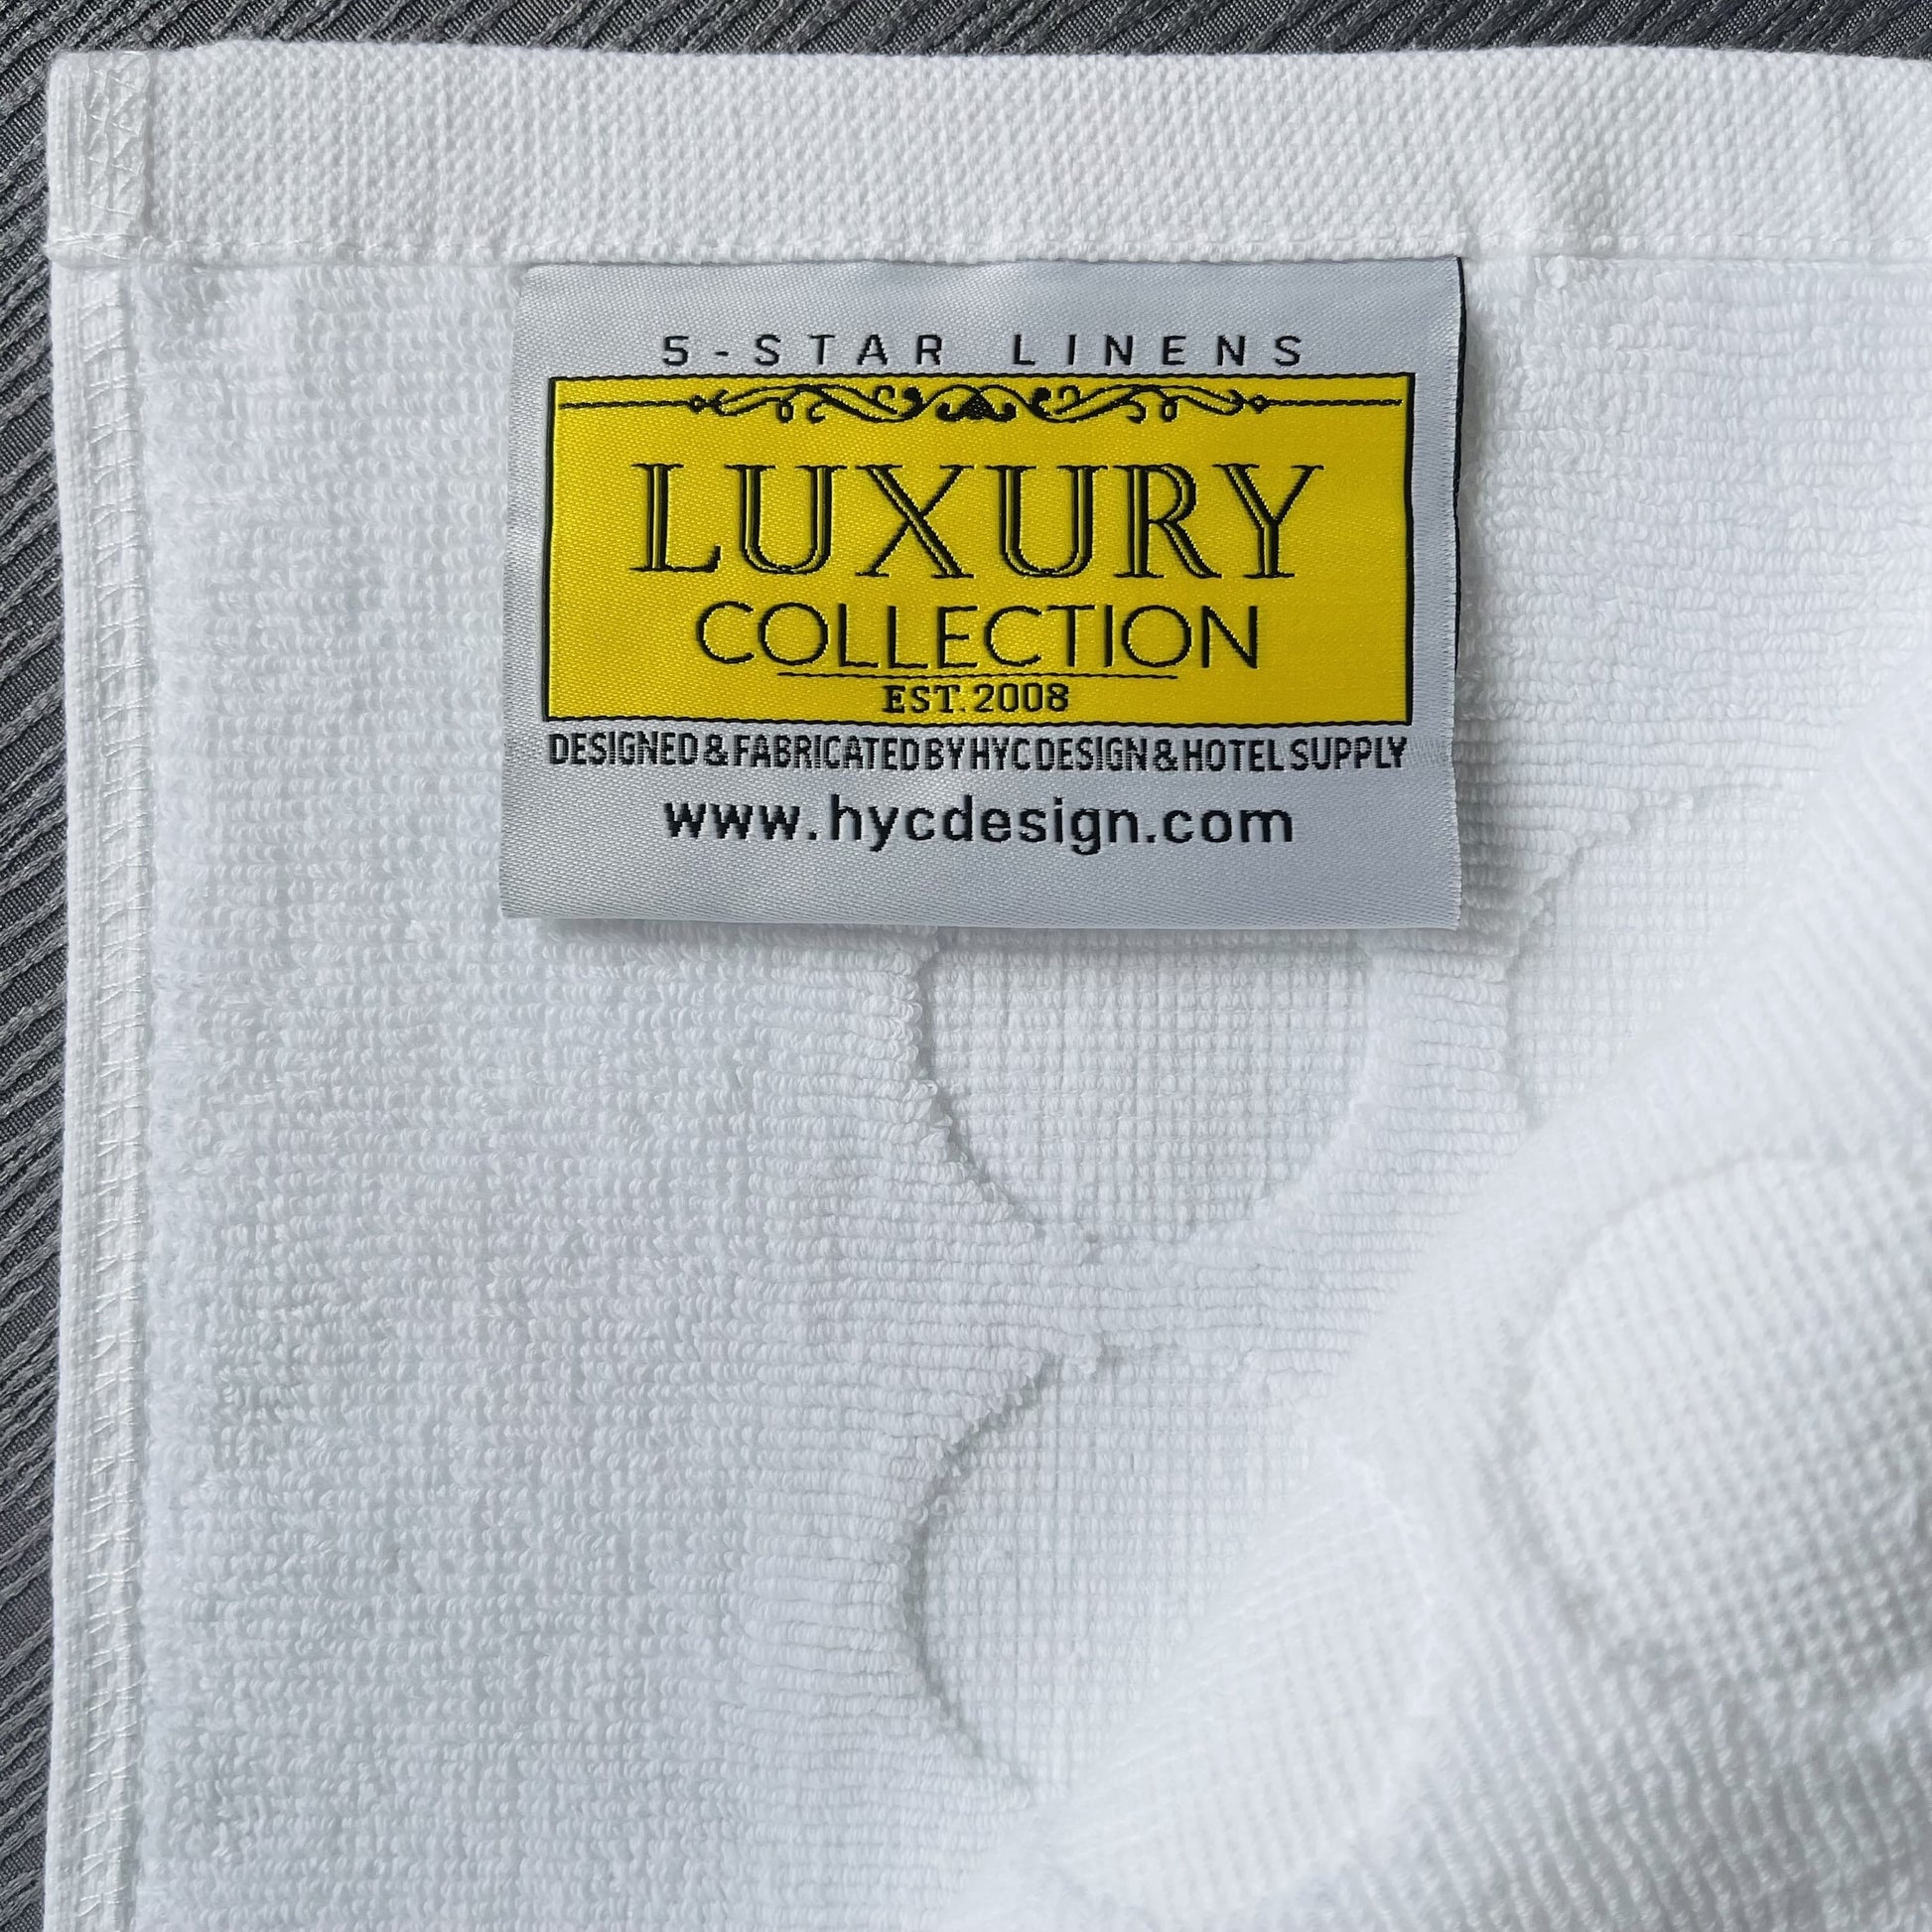 Luxury Collection Bathmat - Exclusive Comfort Awaits: Indulge in Our Little Feet Design Bathmat Crafted for Luxurious Comfort - shop now at Canadian Hotel Supplies!